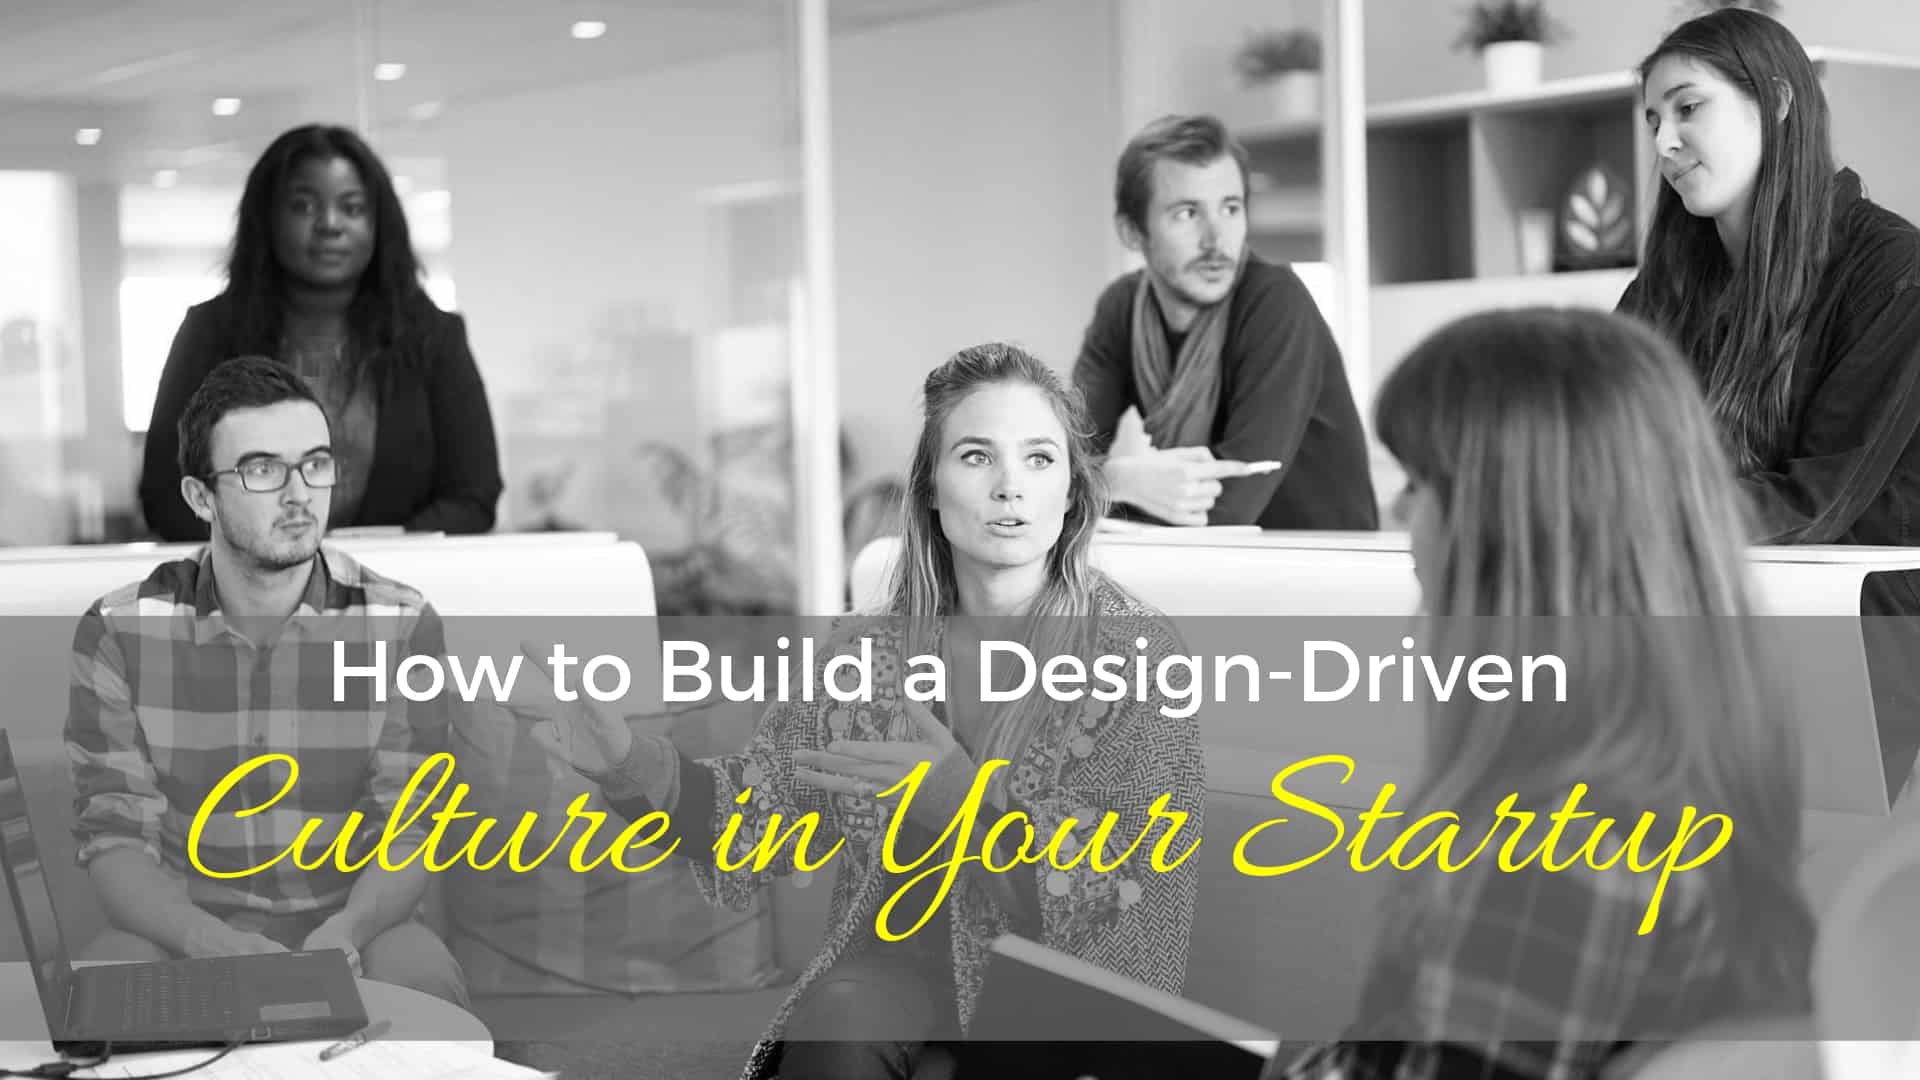 How To Build A Design-Driven Culture In Your Startup